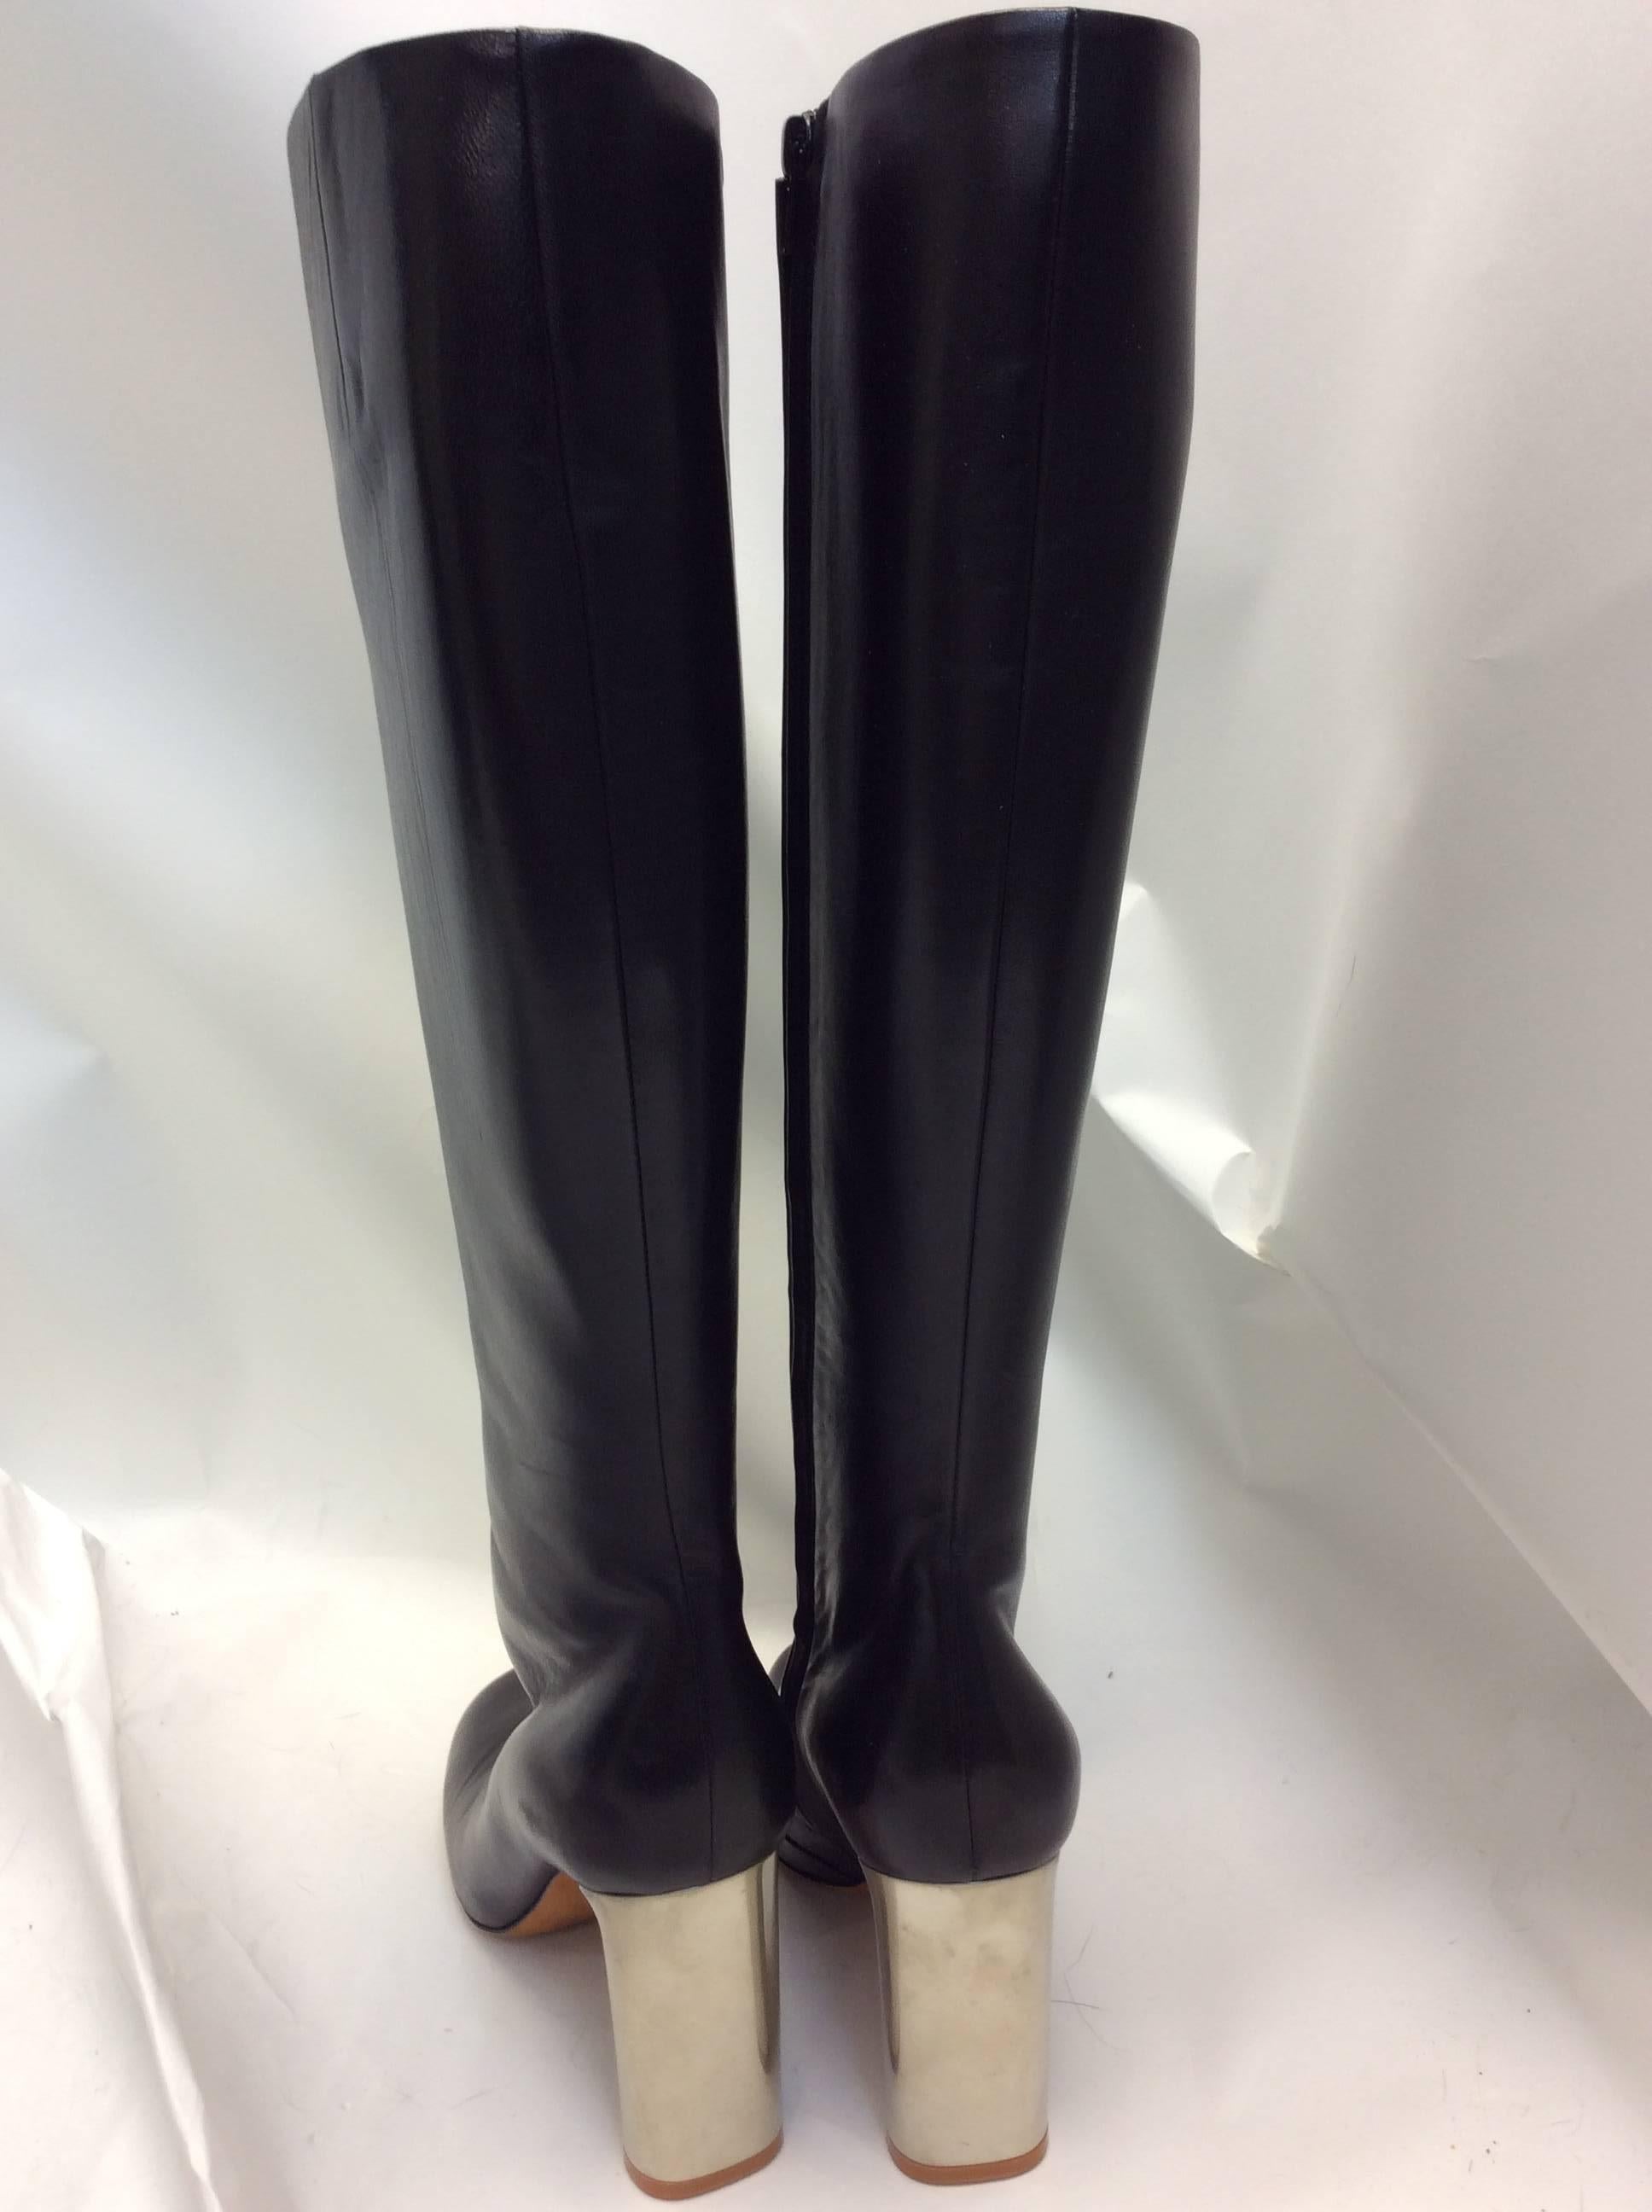 Celine Black Leather Knee High Boots In Excellent Condition For Sale In Narberth, PA